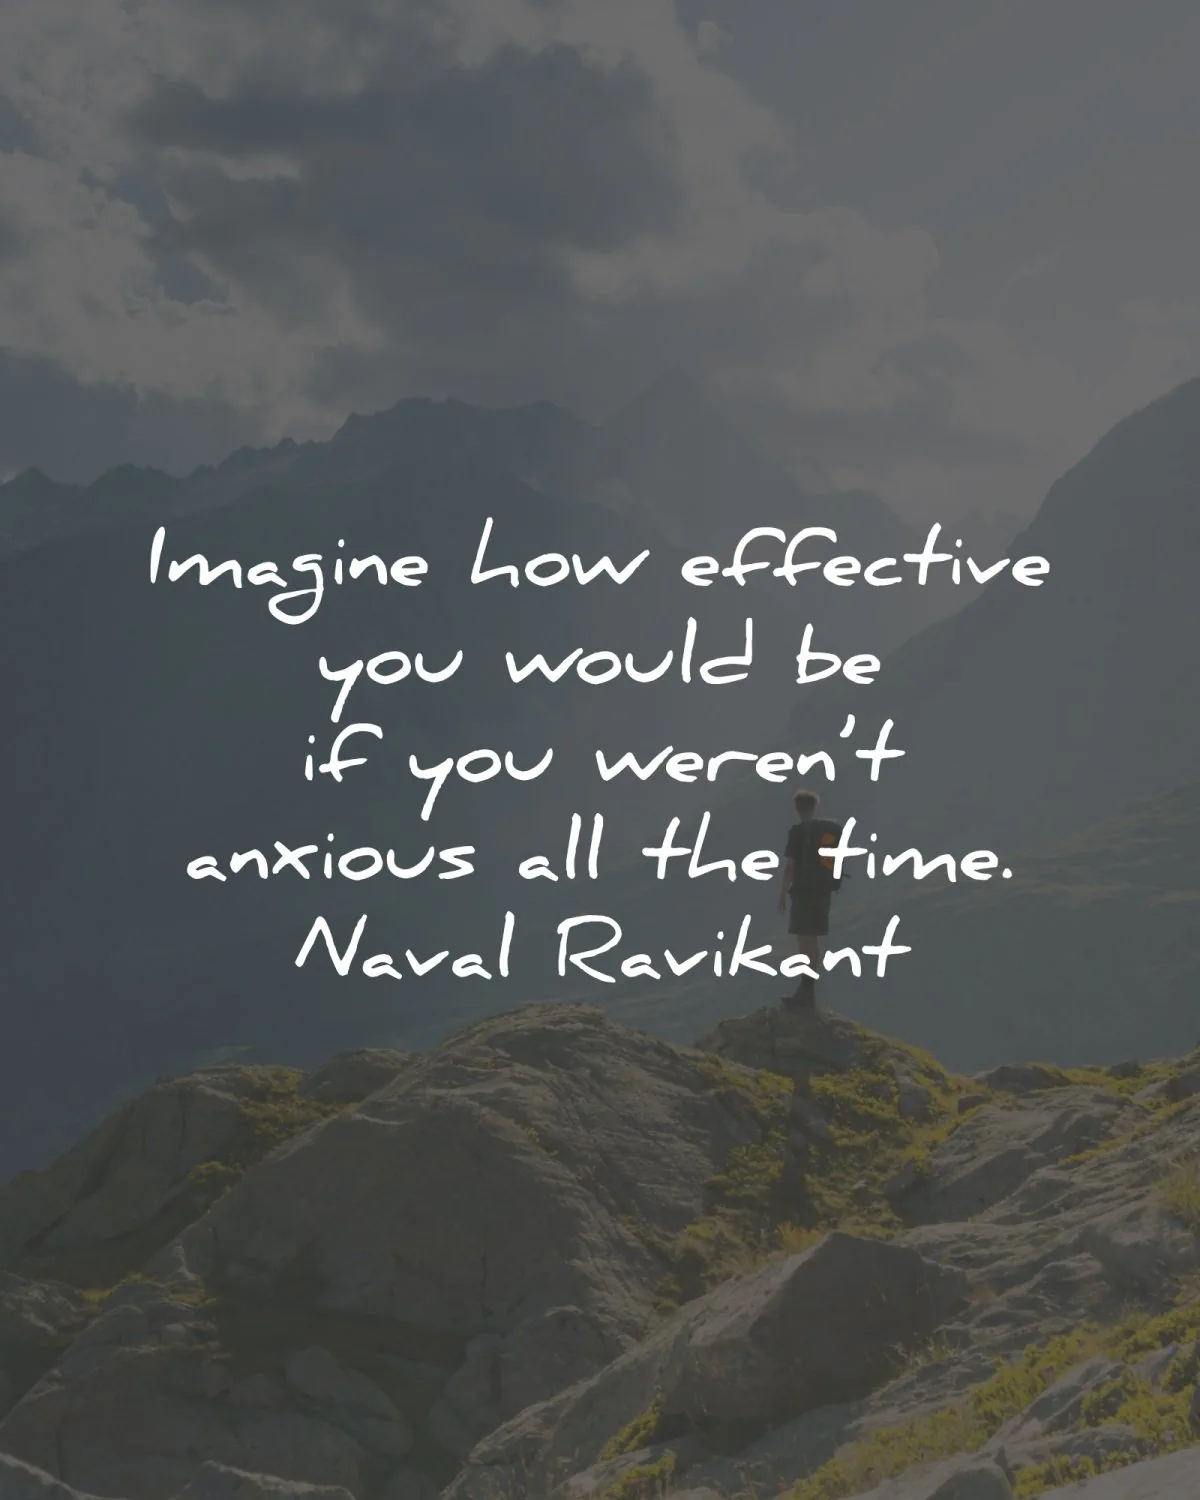 anxiety quotes imagine effective anxious naval ravikant wisdom